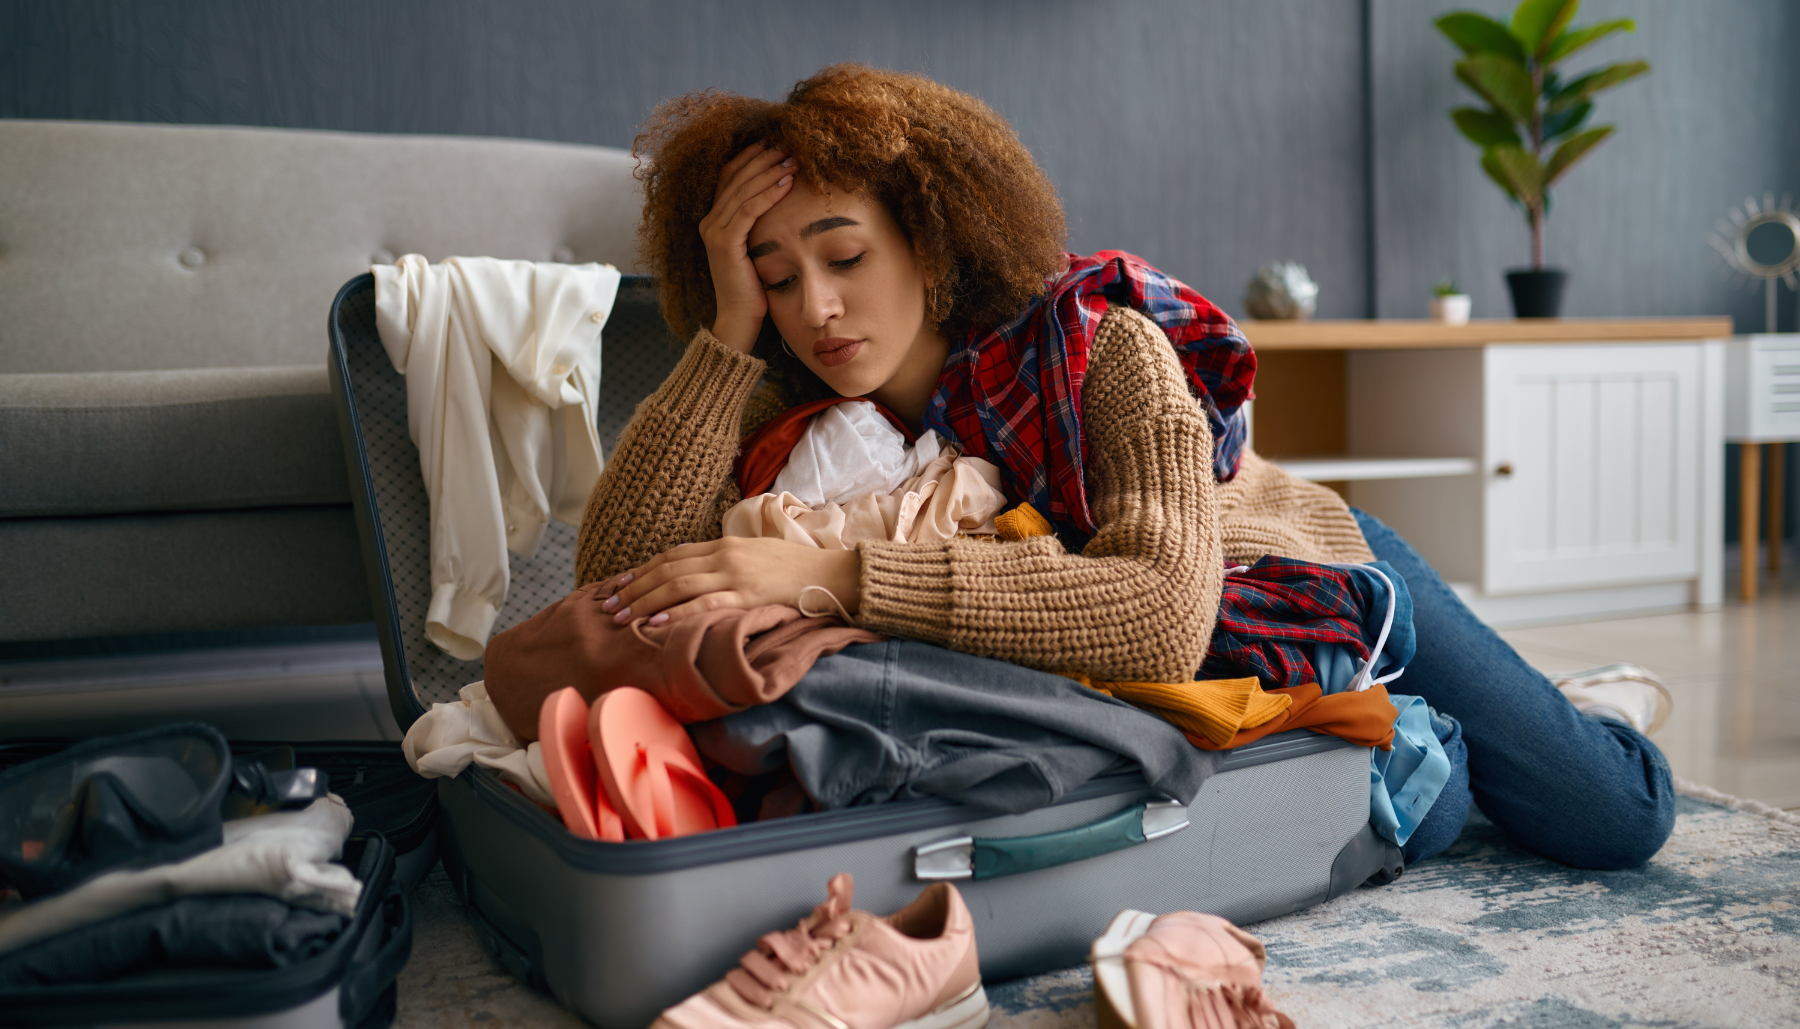 Sad woman sitting with arms on top of open messy suitcase